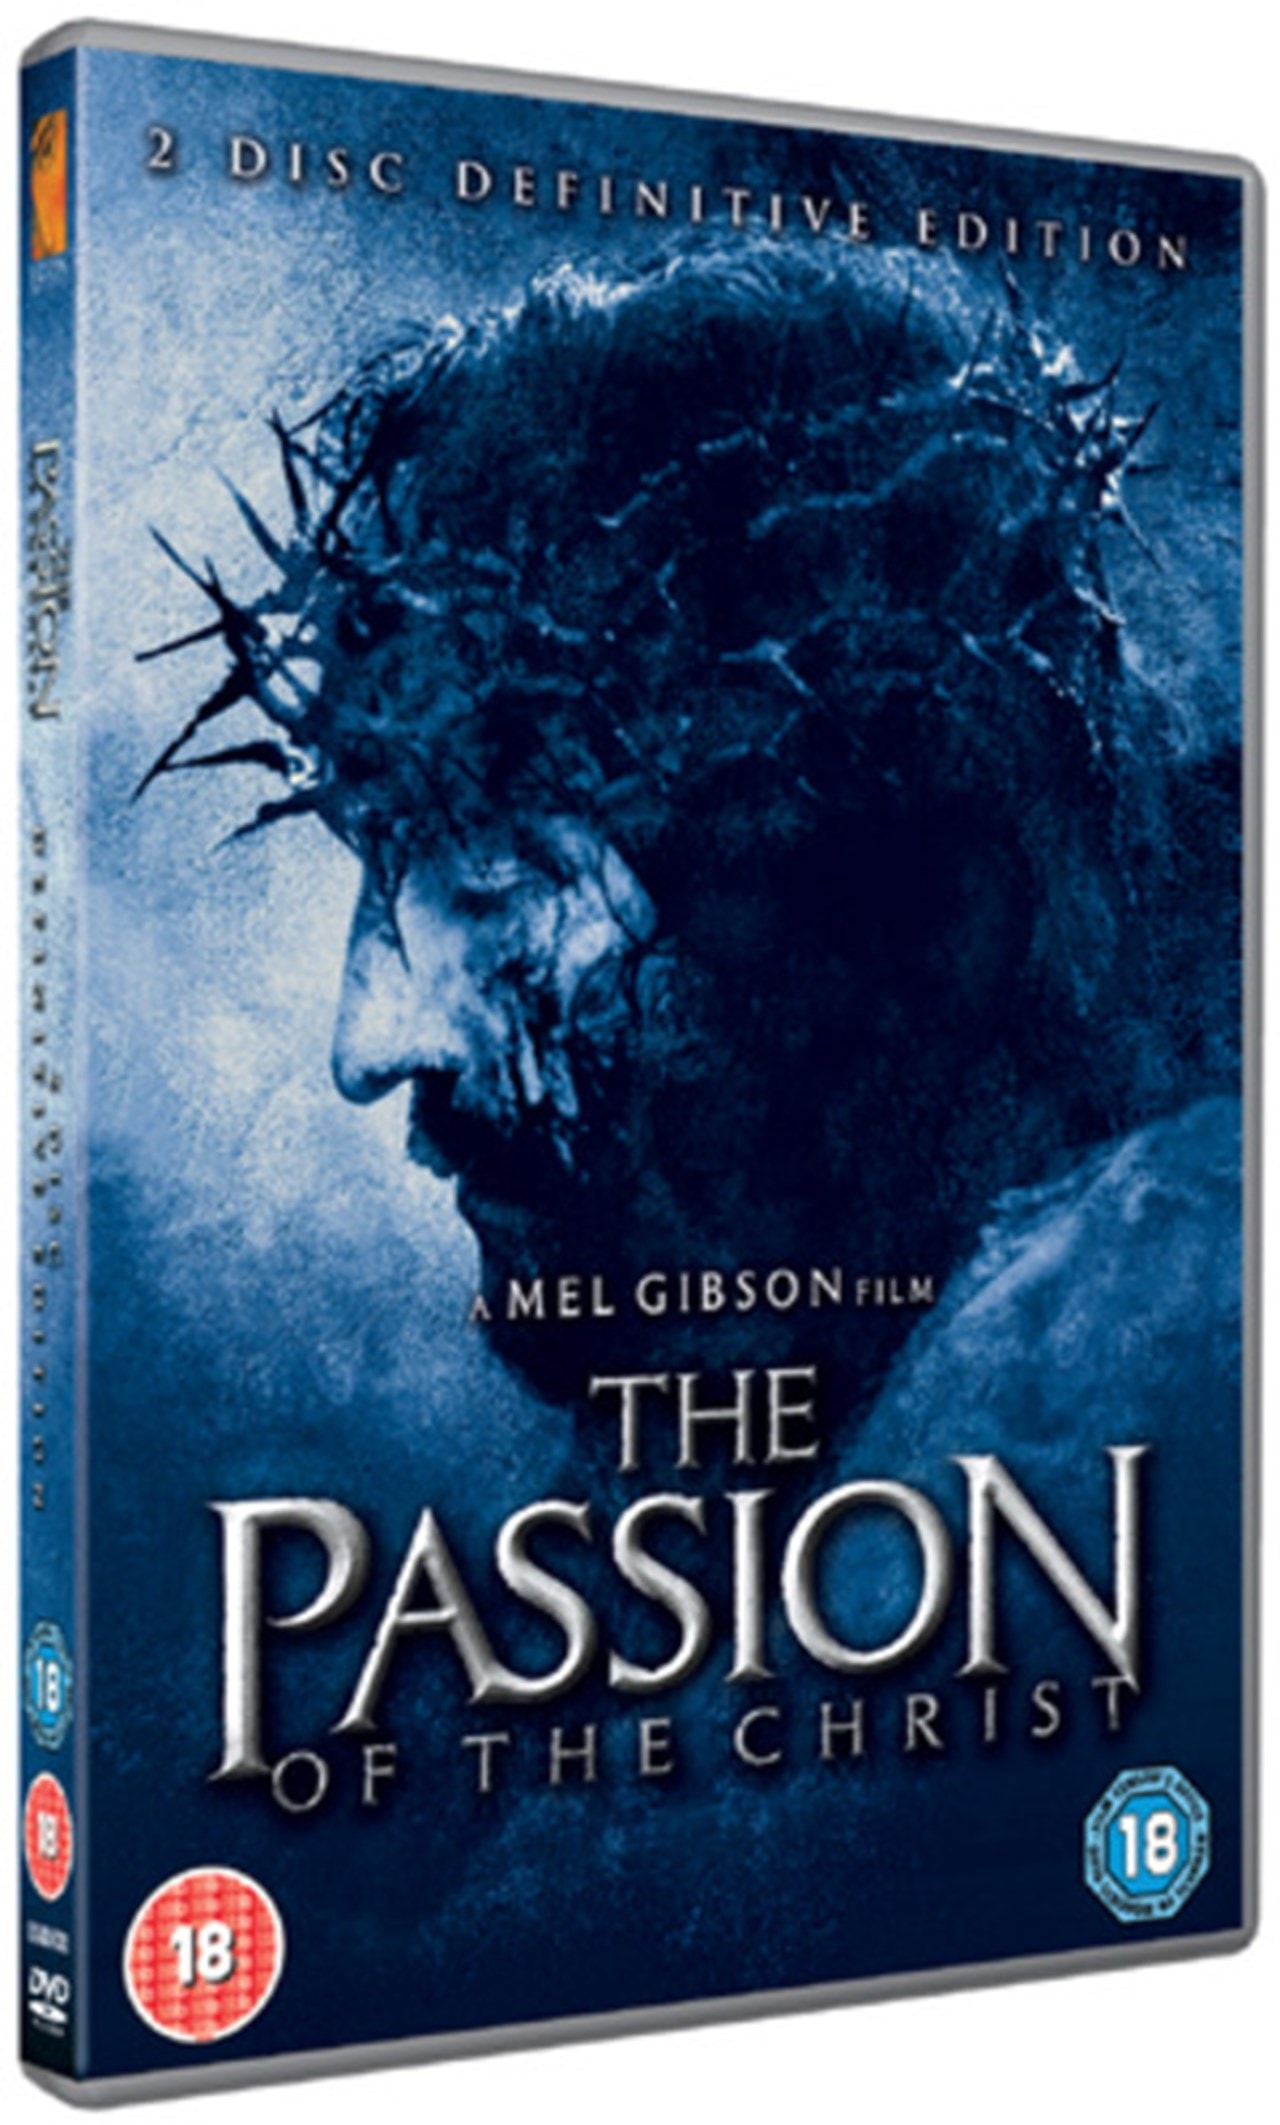 The Passion Of The Christ Dvd Free Shipping Over 20 Hmv Store